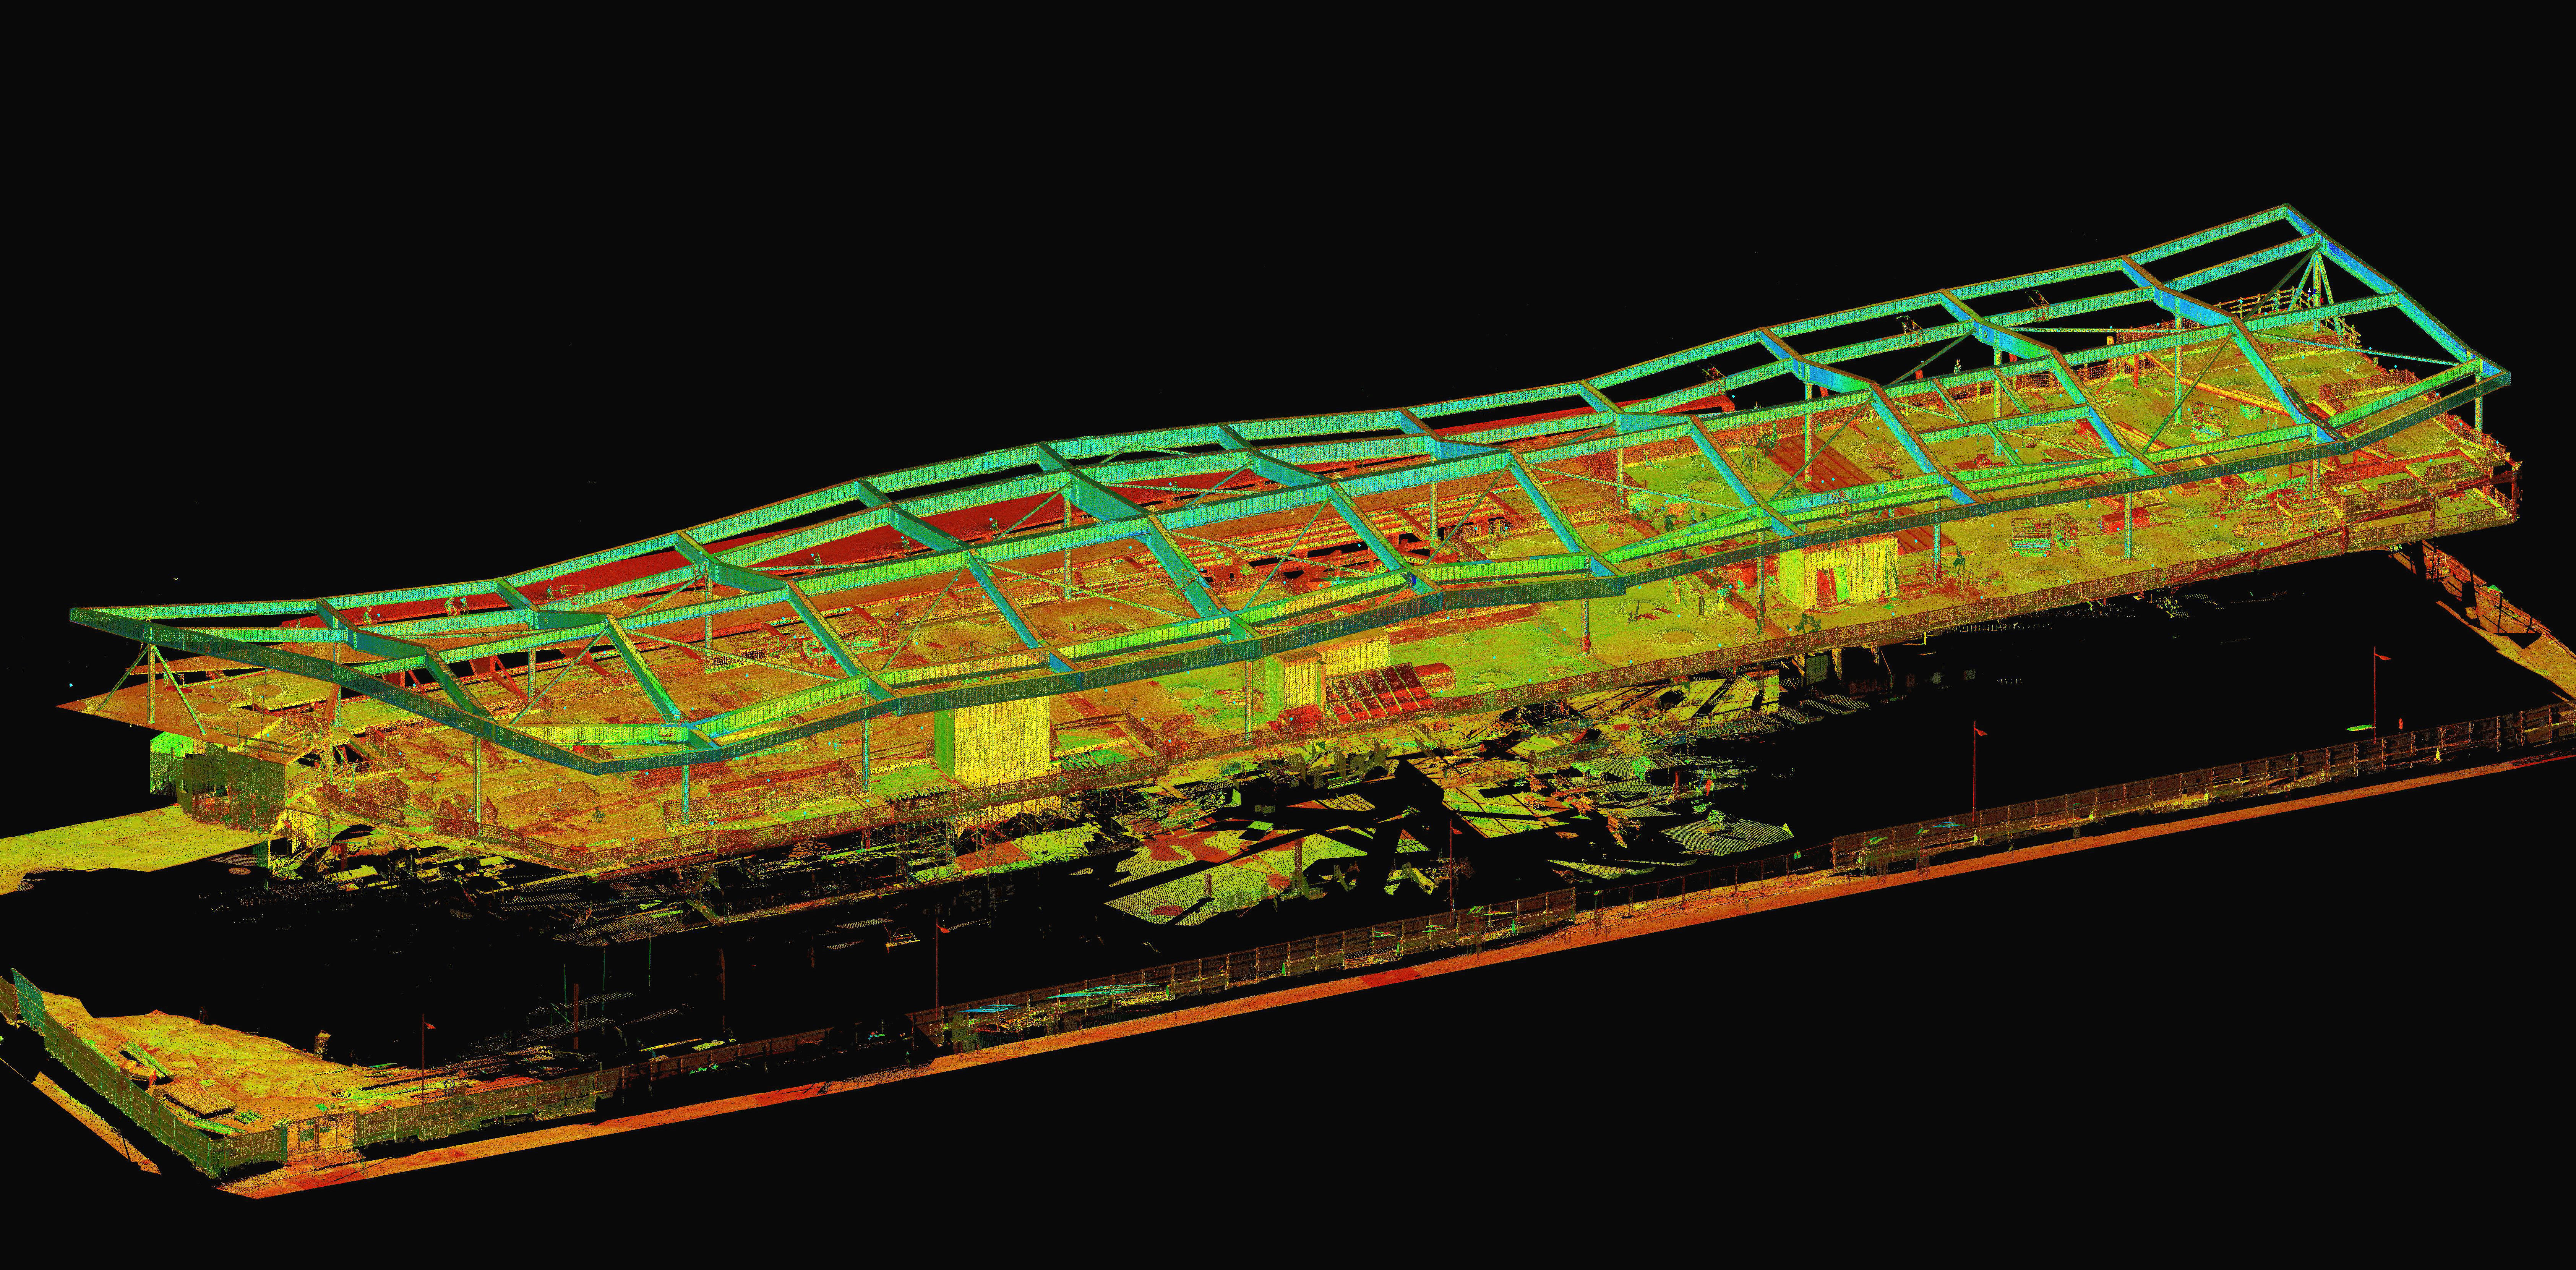 Laser scanning of the roof constructions of the Helsinki Central Library